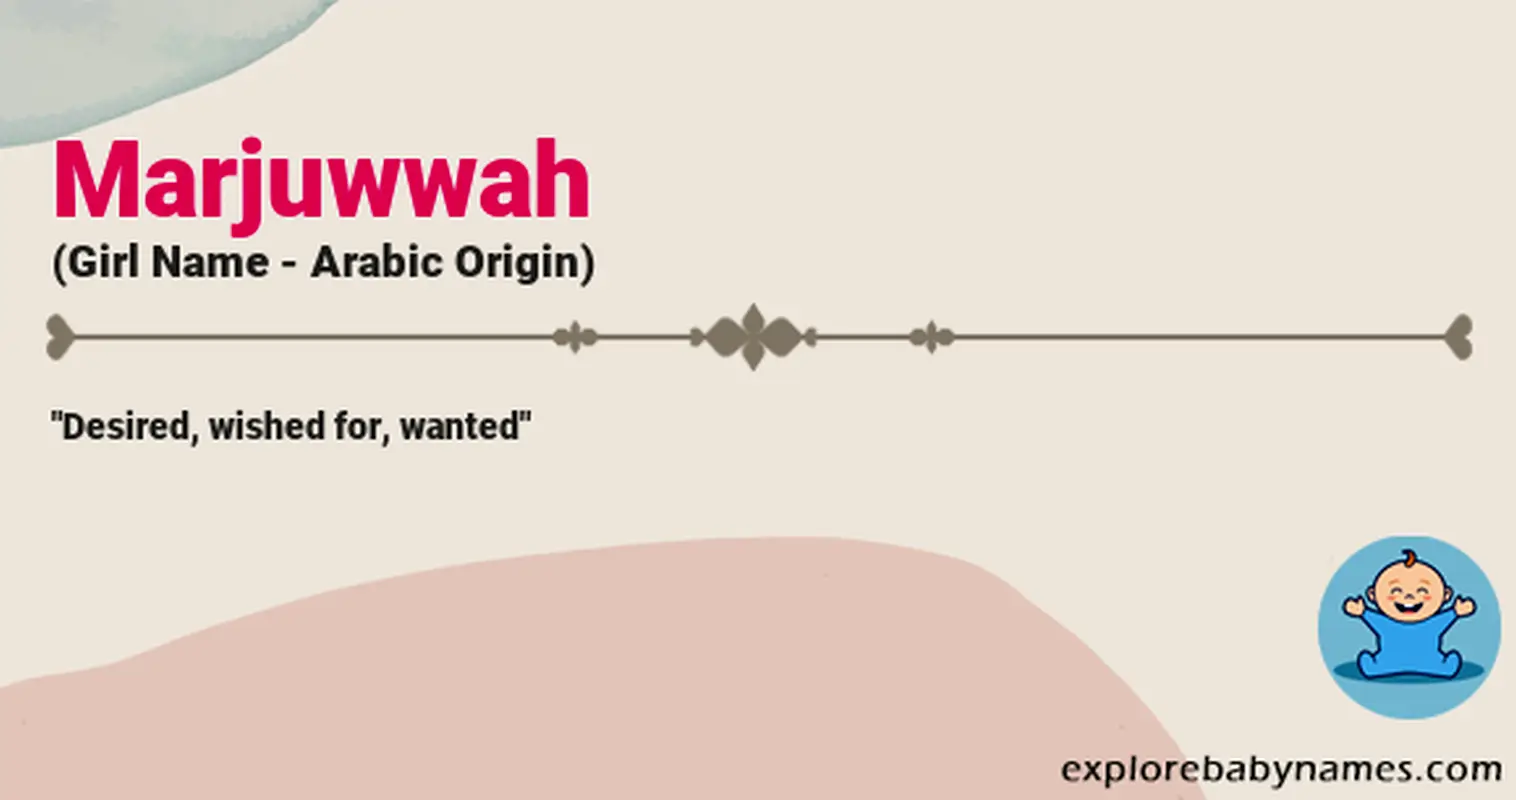 Meaning of Marjuwwah